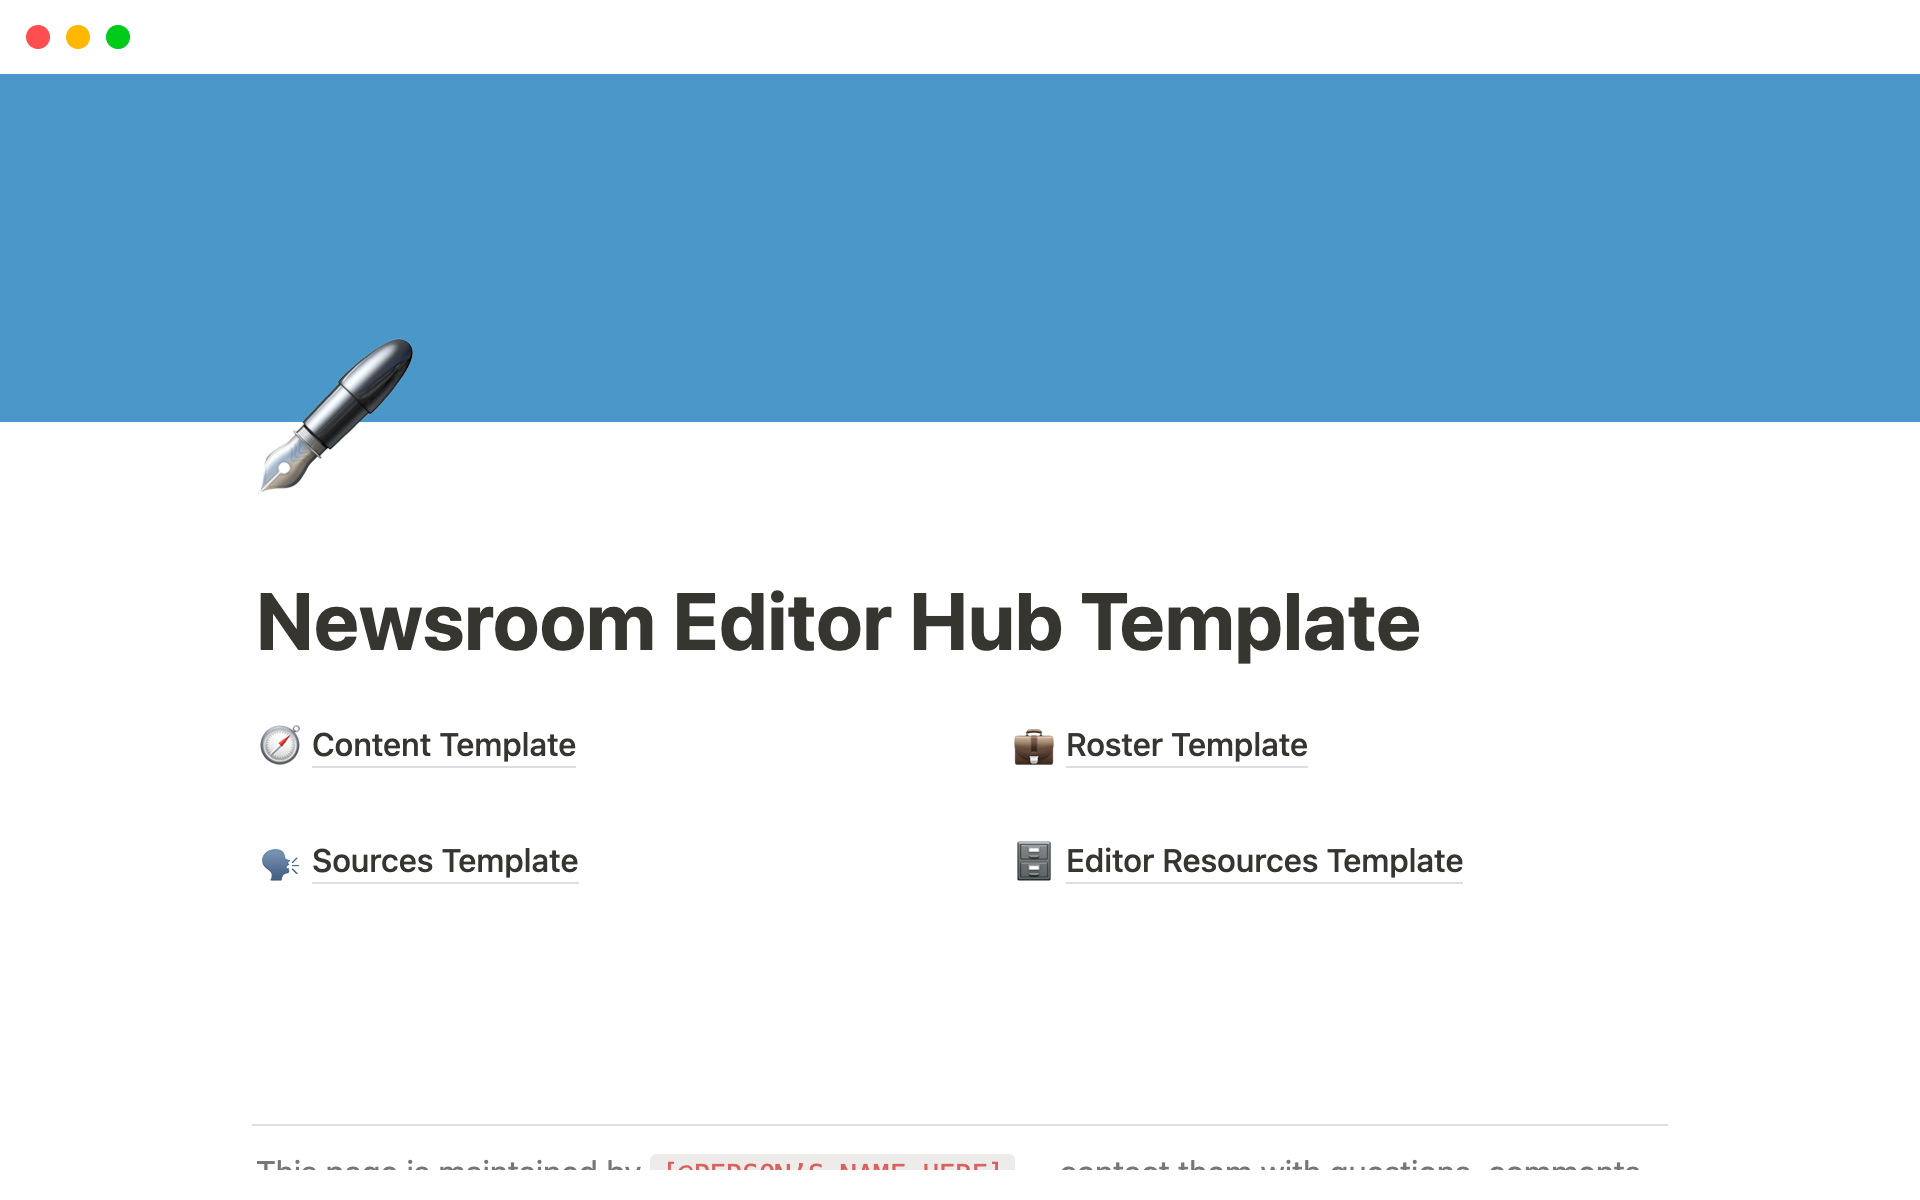 A template preview for Newsroom Editor Hub Template